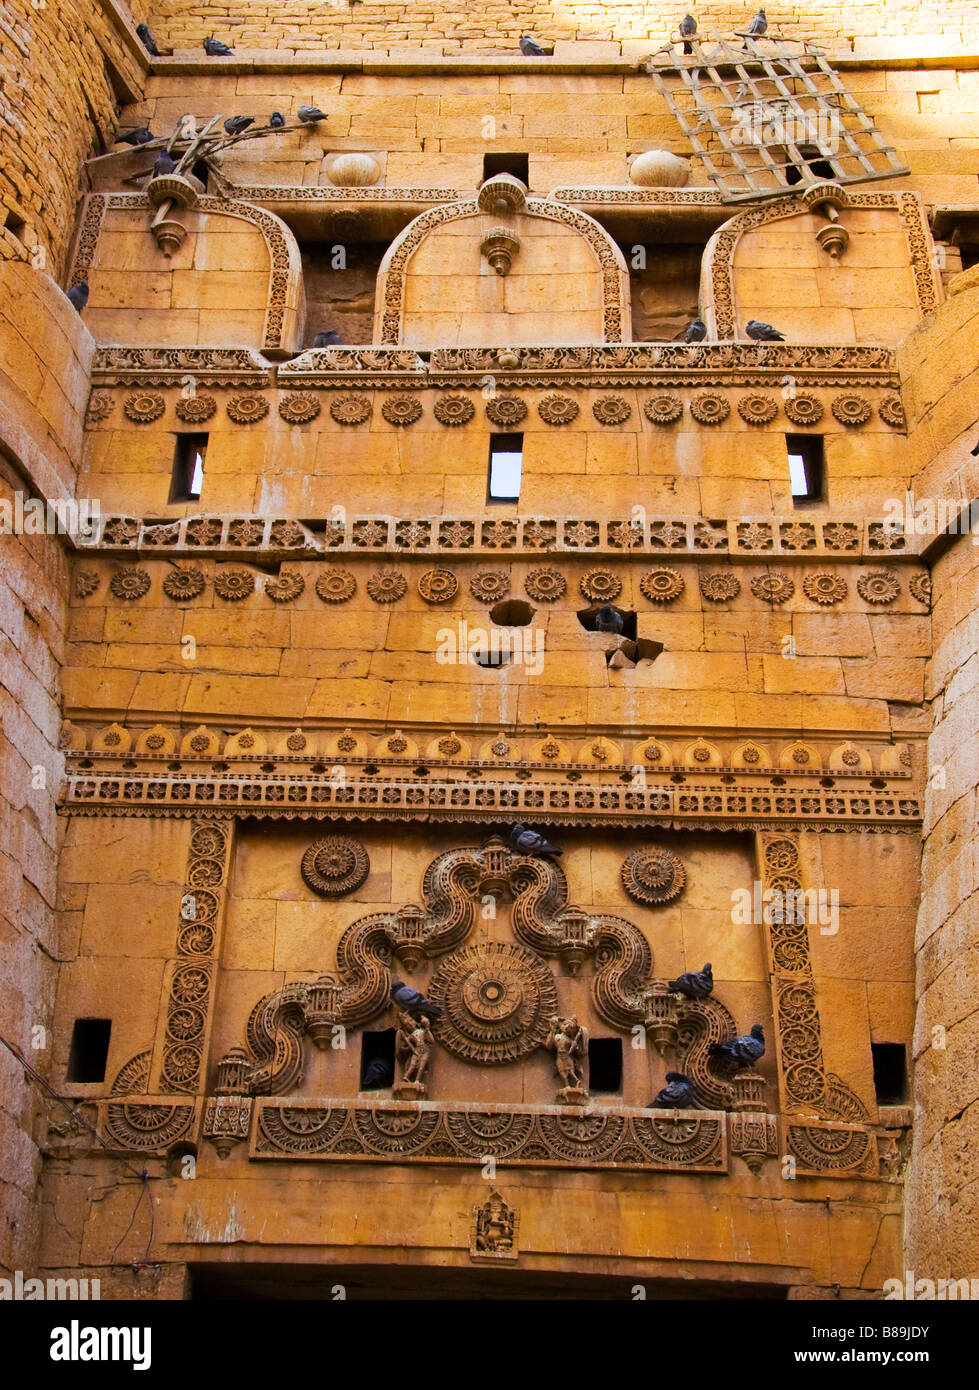 Decorative carving design in yellow stone architecture Jaisalmer Rajasthan India Stock Photo